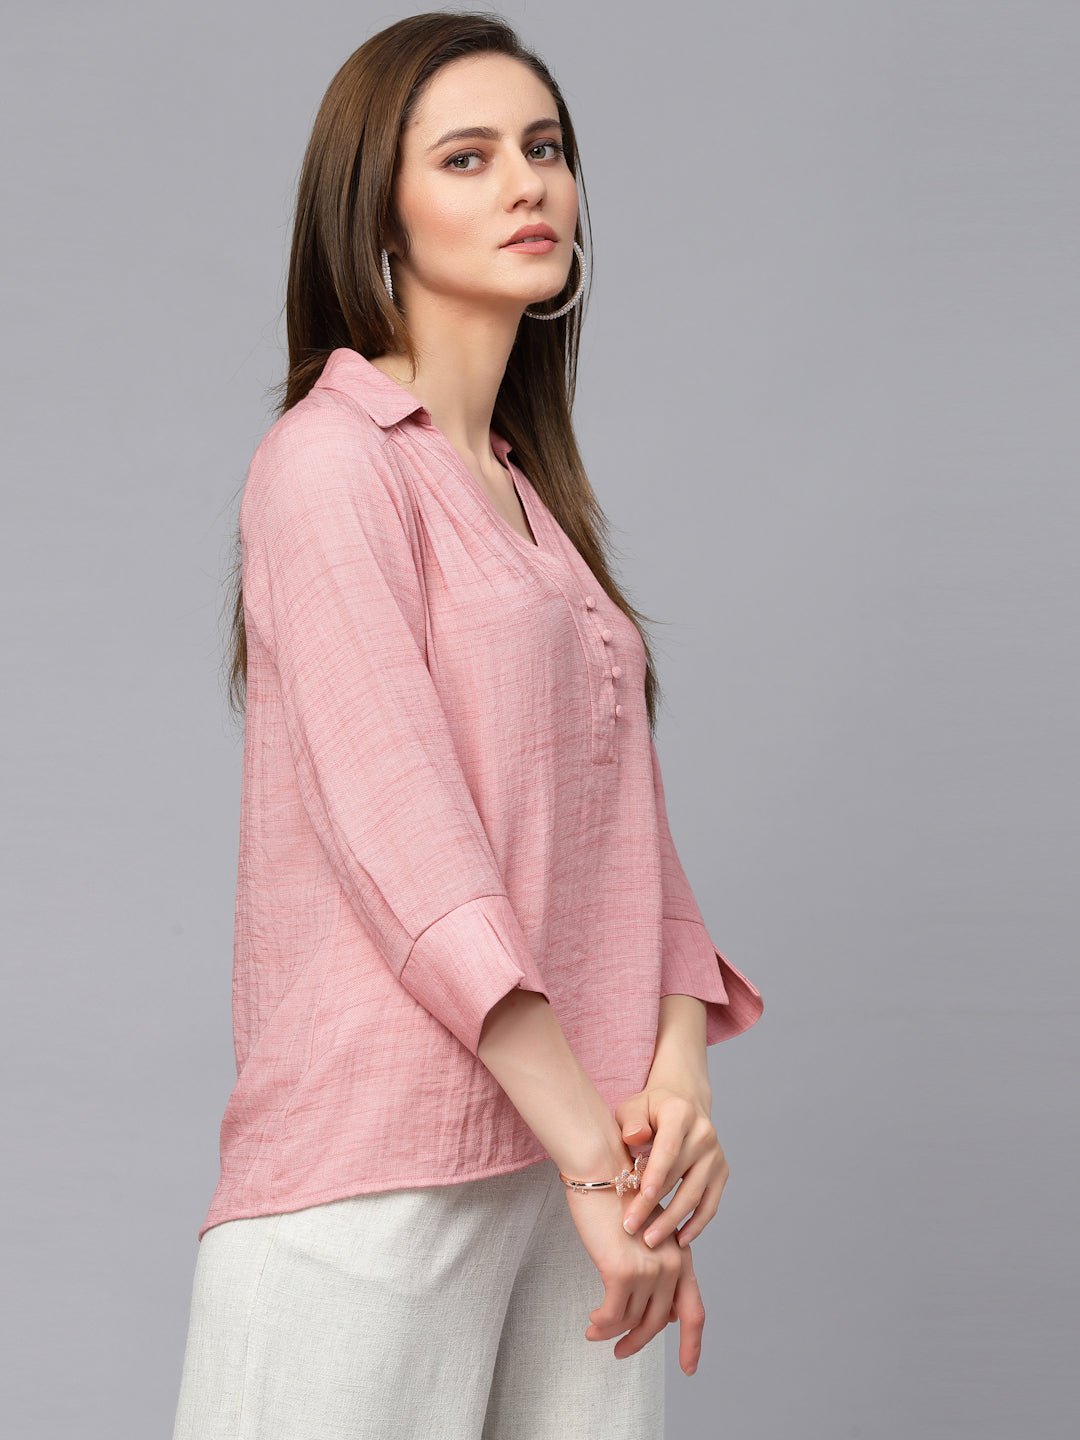 Gipsy Pink Textured Cotton Tunic